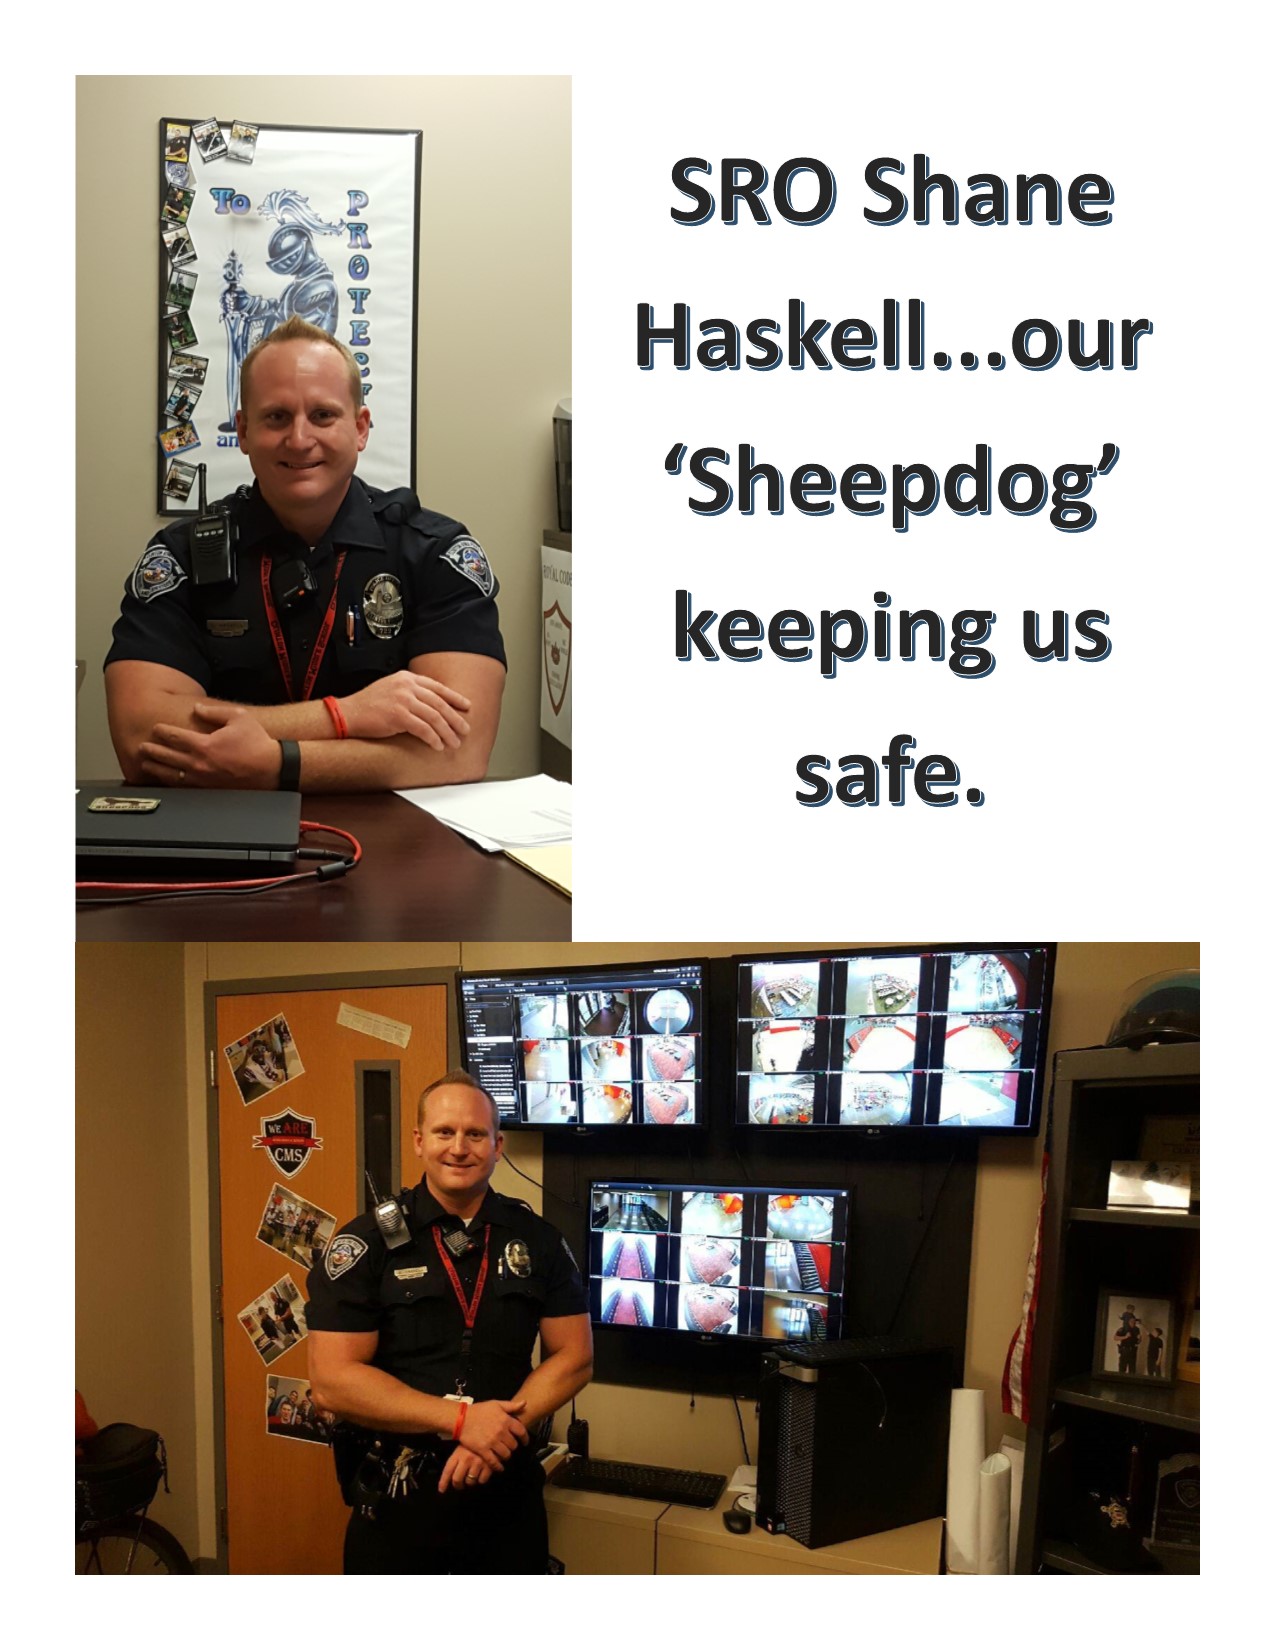 Flyer of Officer Haskell stating "SRO Haskell ... our Sheepdog keeping us safe"